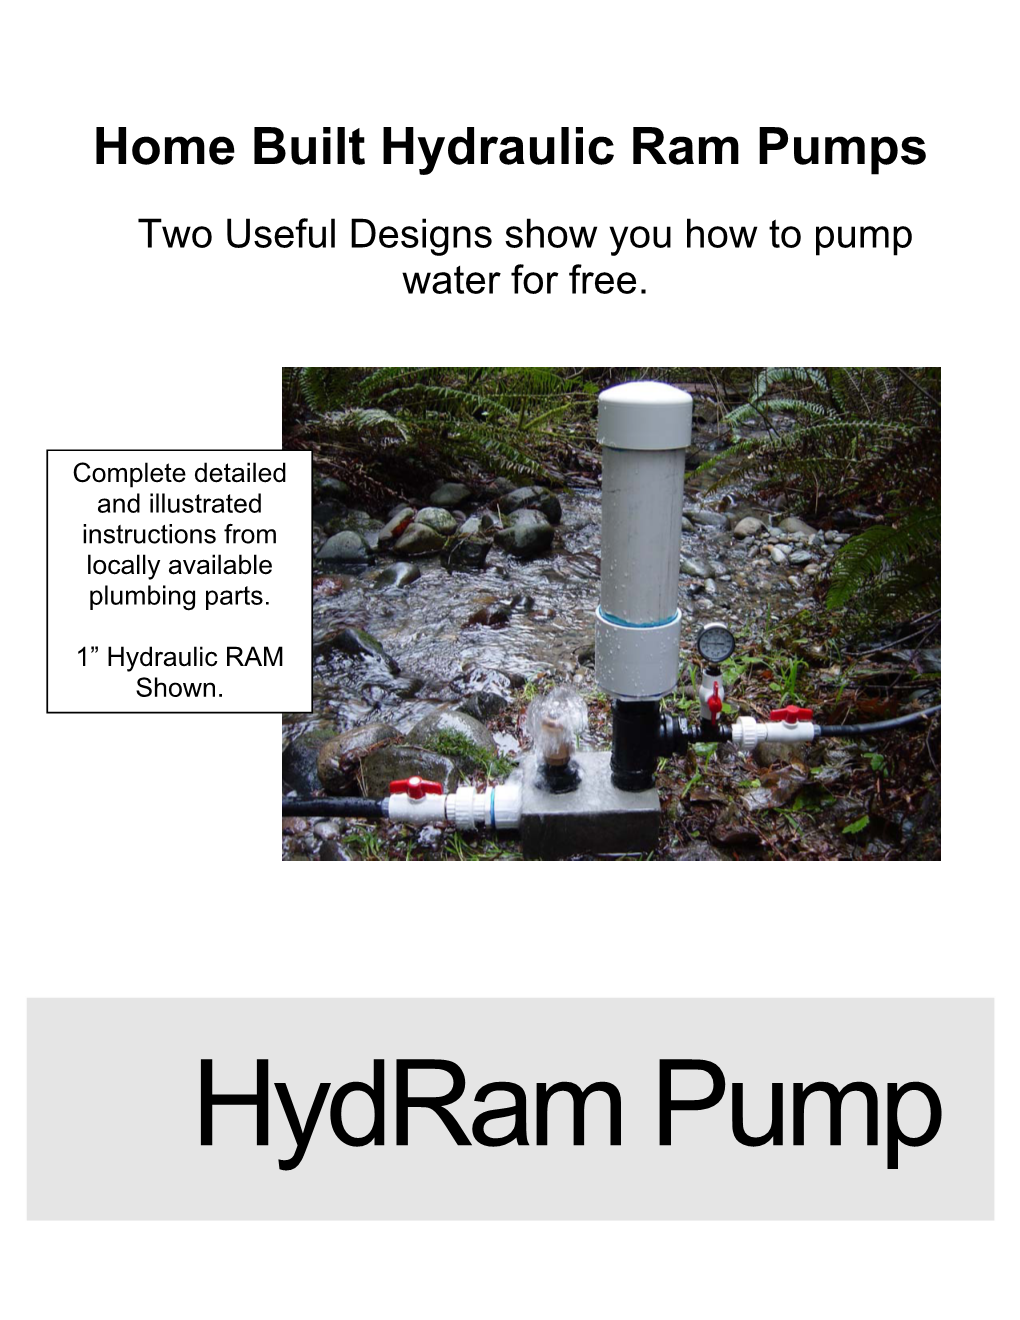 Home Built Hydraulic Ram Pumps Two Useful Designs Show You How to Pump Water for Free